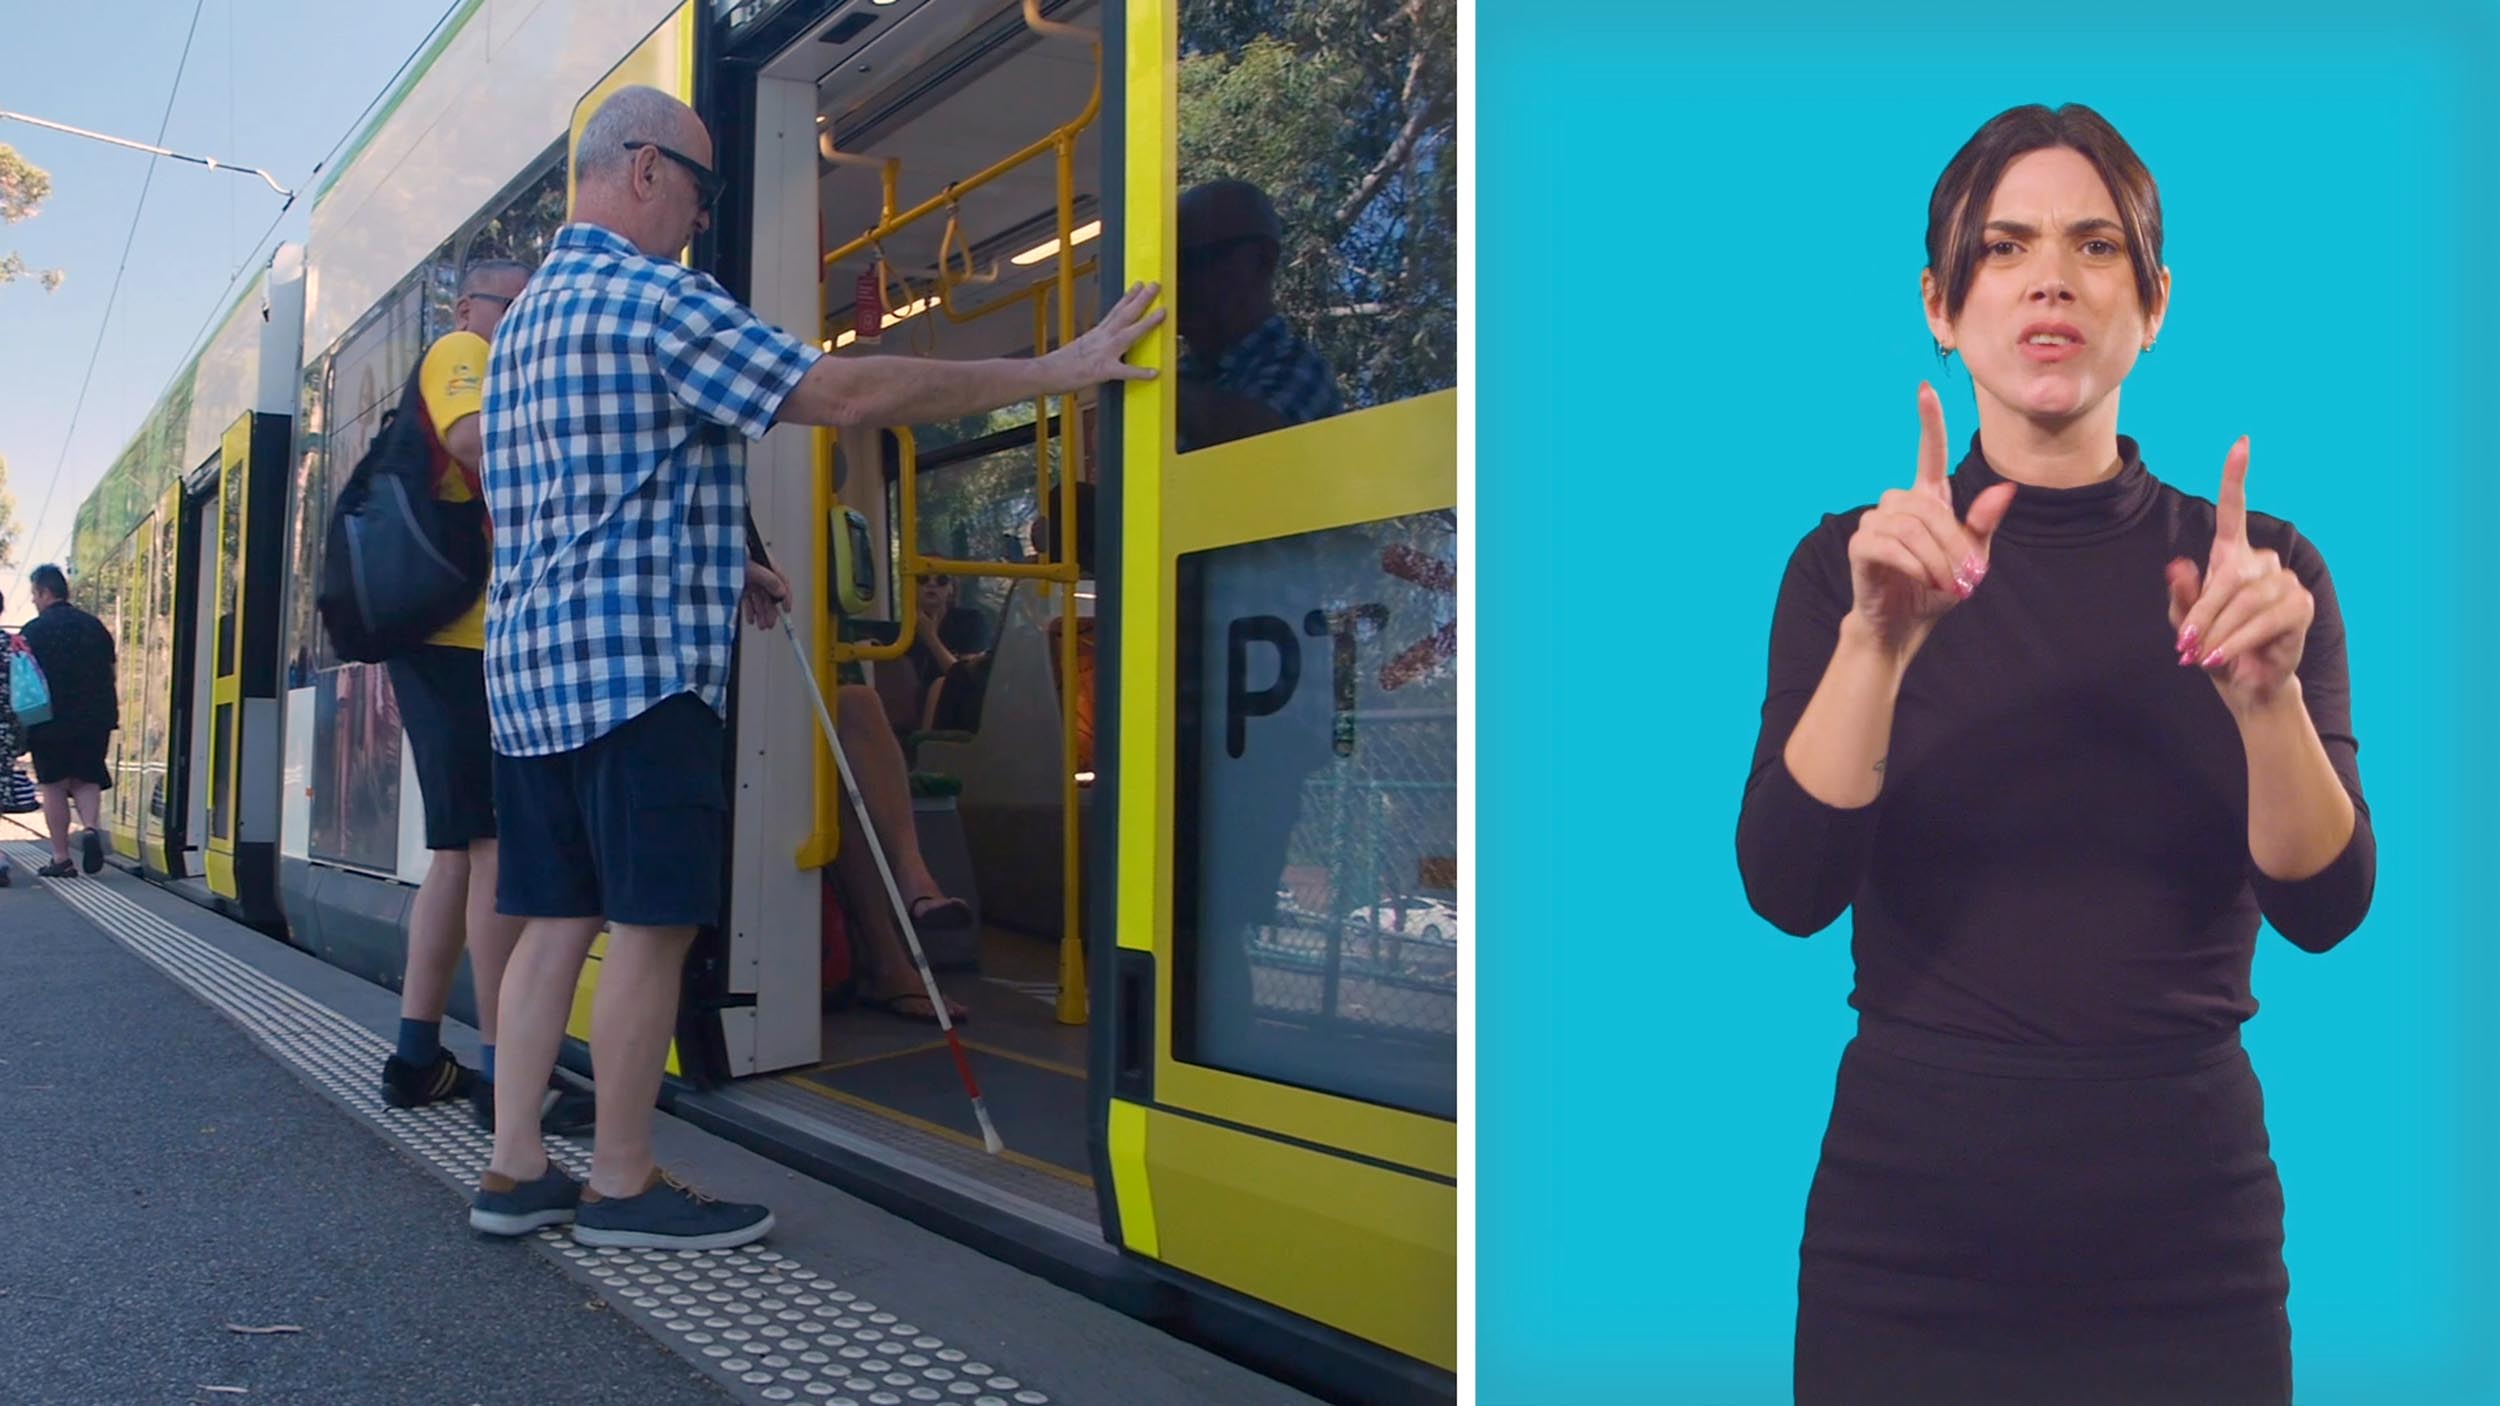 Screengrab from the Auslan video shows a White Cane User boarding a tram.